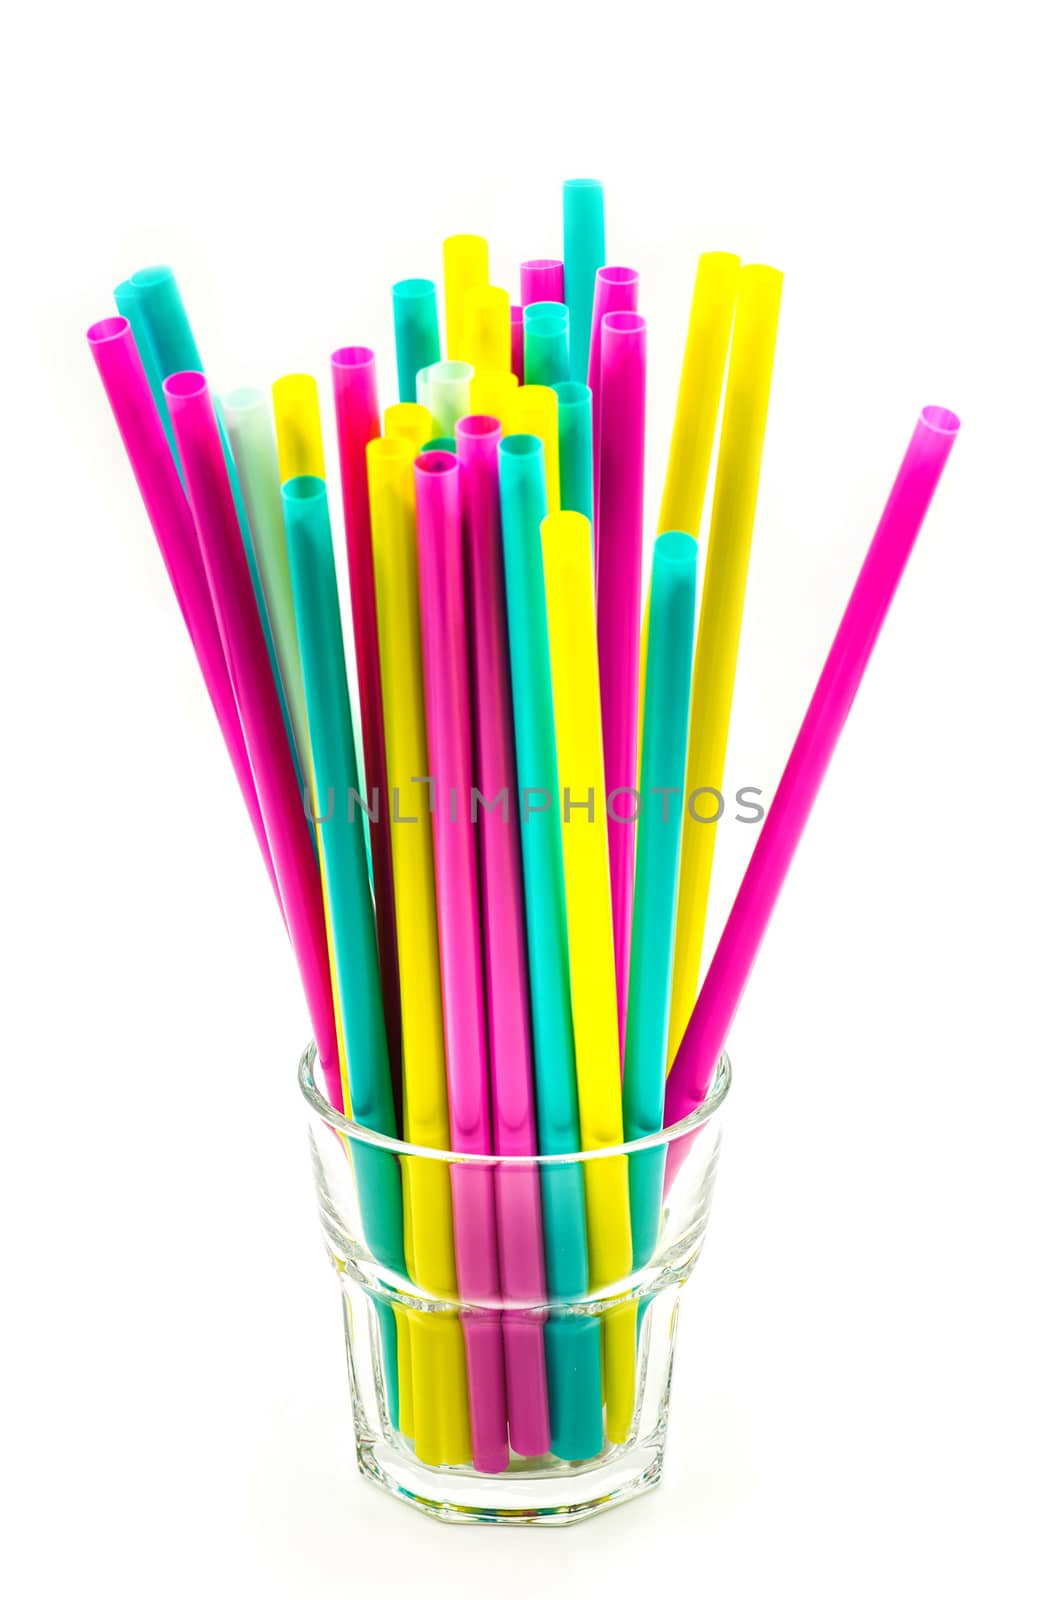 sipping straws on the white background by Desperada